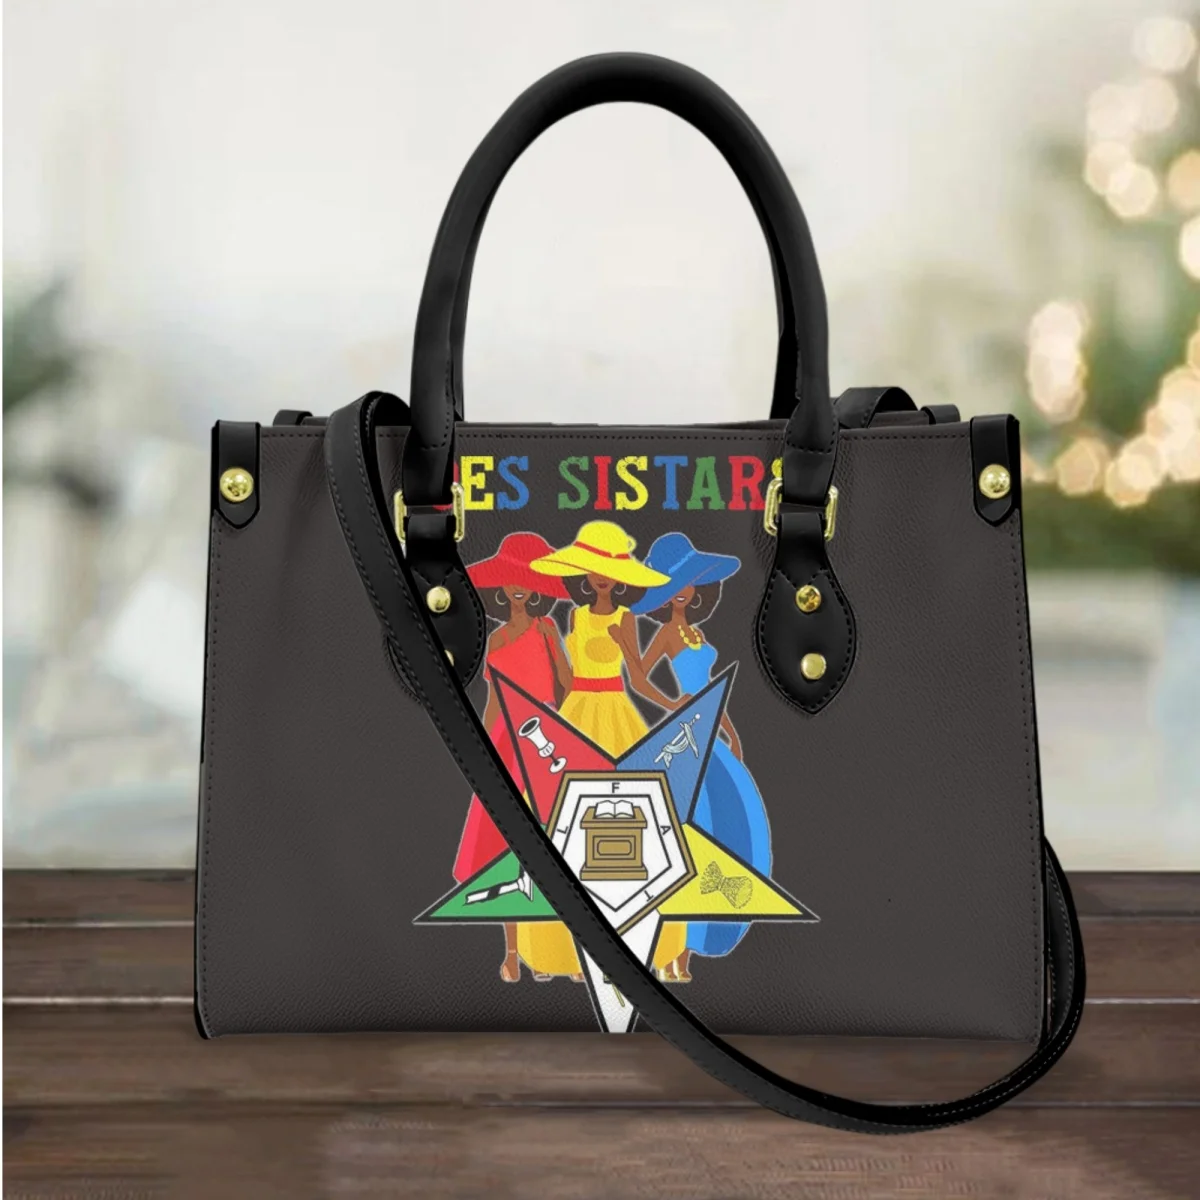 OES Sistars Order Of Eastern Print Fashion Top Handle Tote Bags for Women Party Trend Long Shoulder Strap Clutch Cross Body Bags